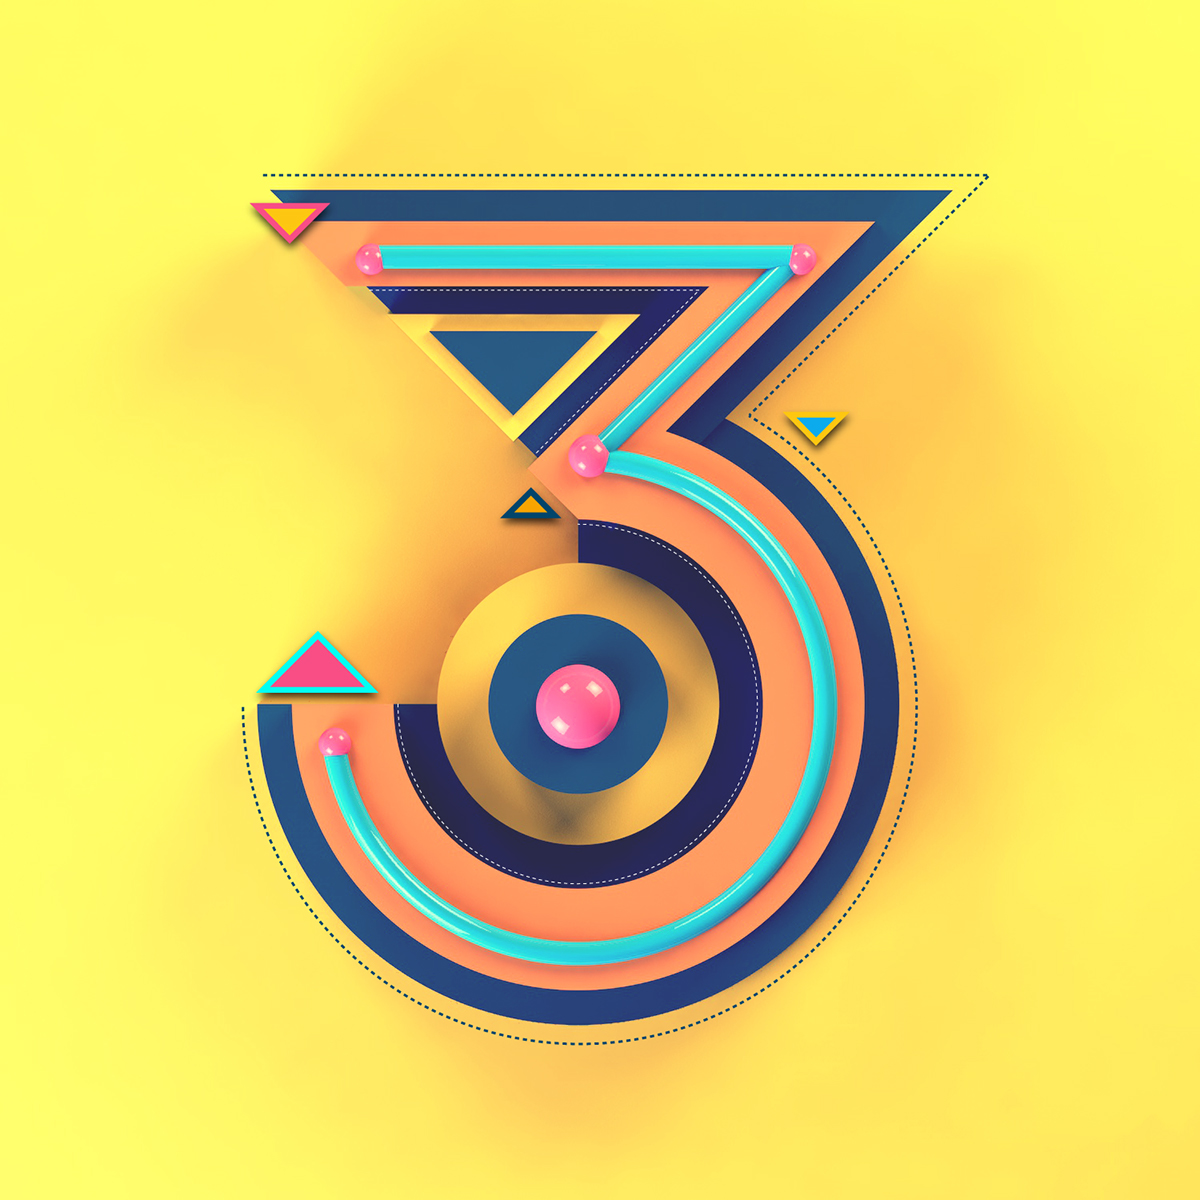 36daysoftype 36days type 3D Illustrator vector collage c4d SketchUP 36daysoftype03